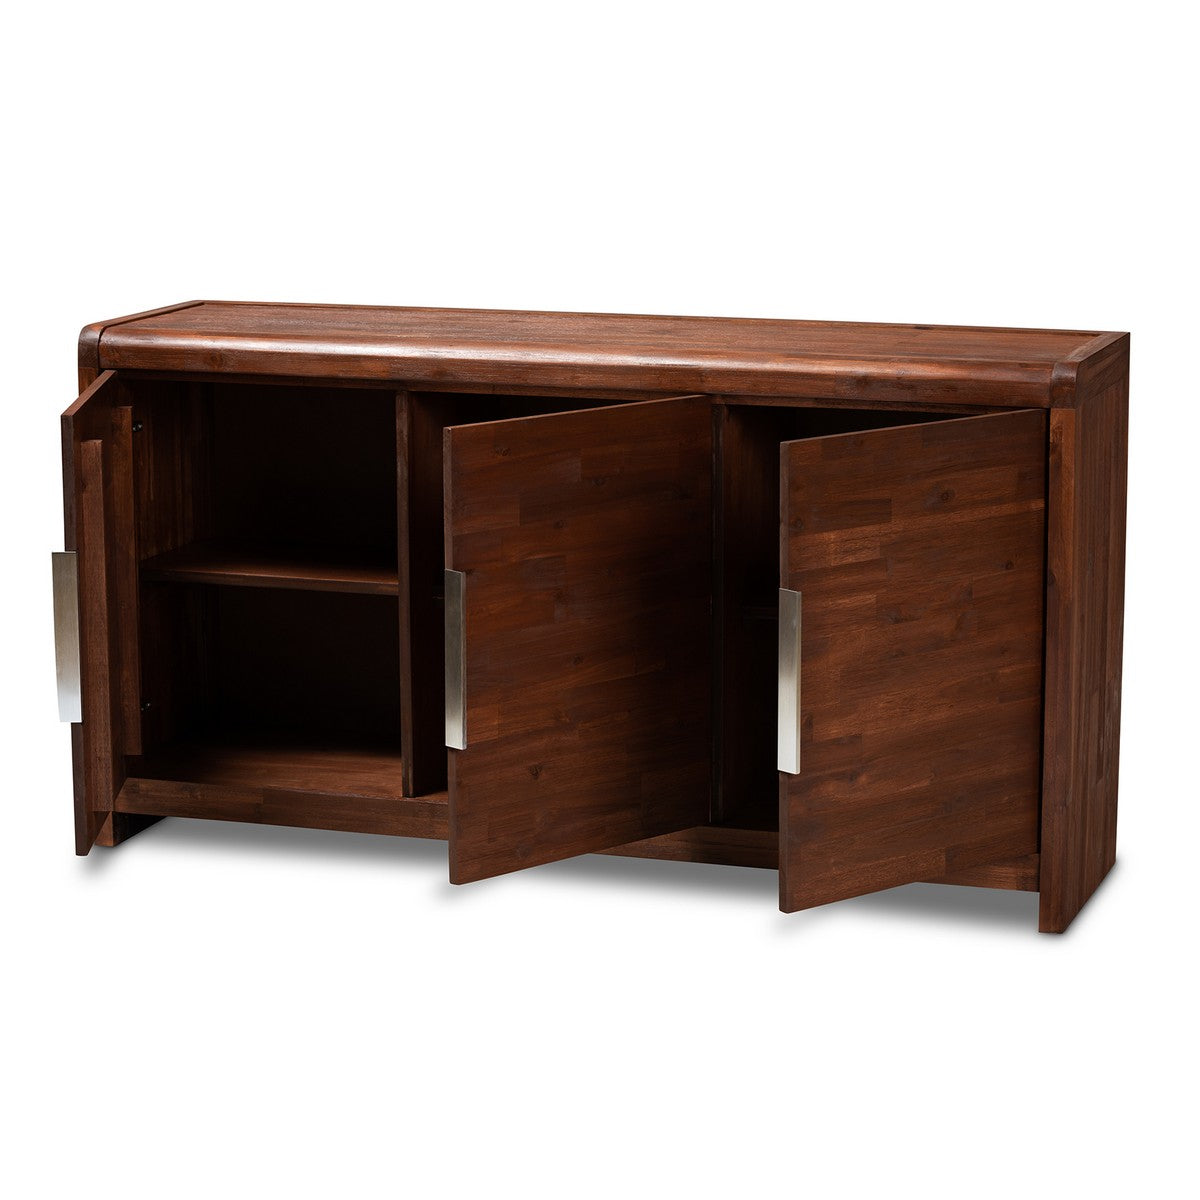 Baxton Studio Torres Modern and Contemporary Brown Oak Finished 3-Door Wood Sideboard Buffet